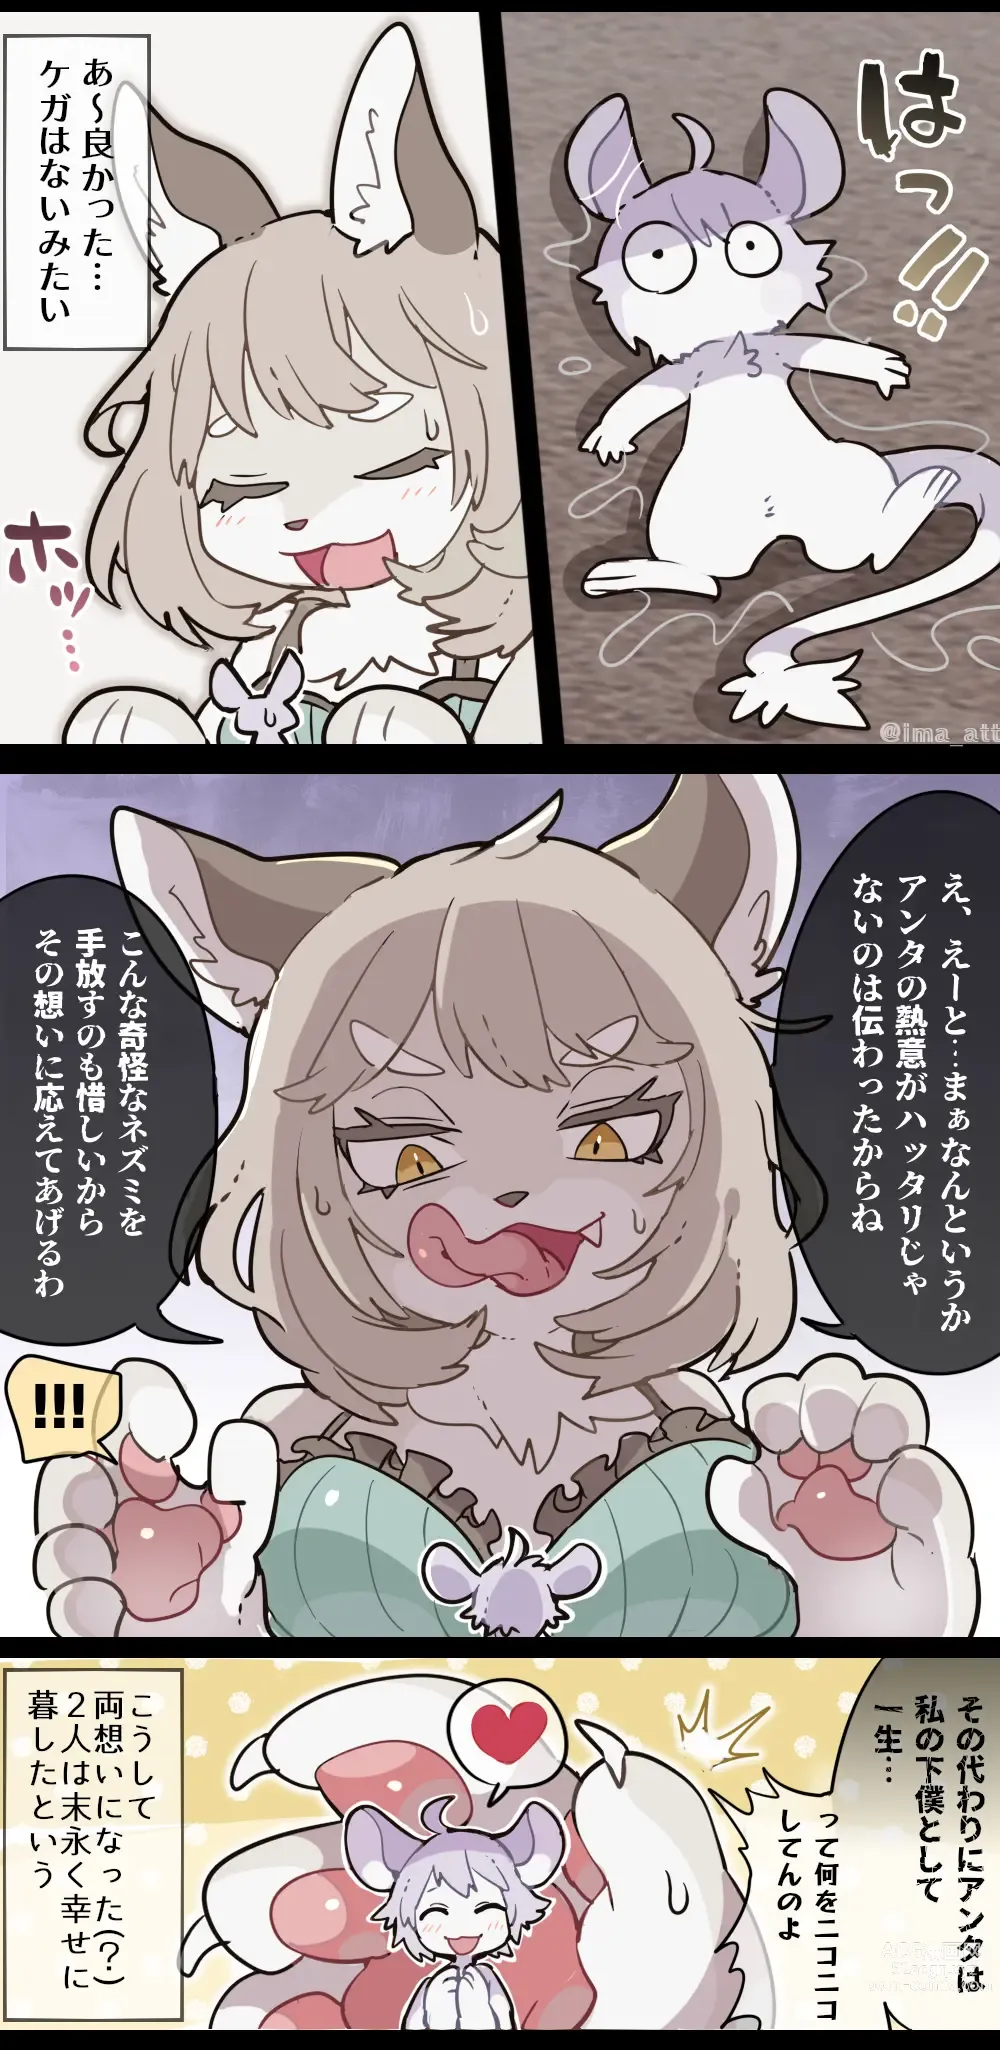 Page 10 of doujinshi Furry Woman VORE